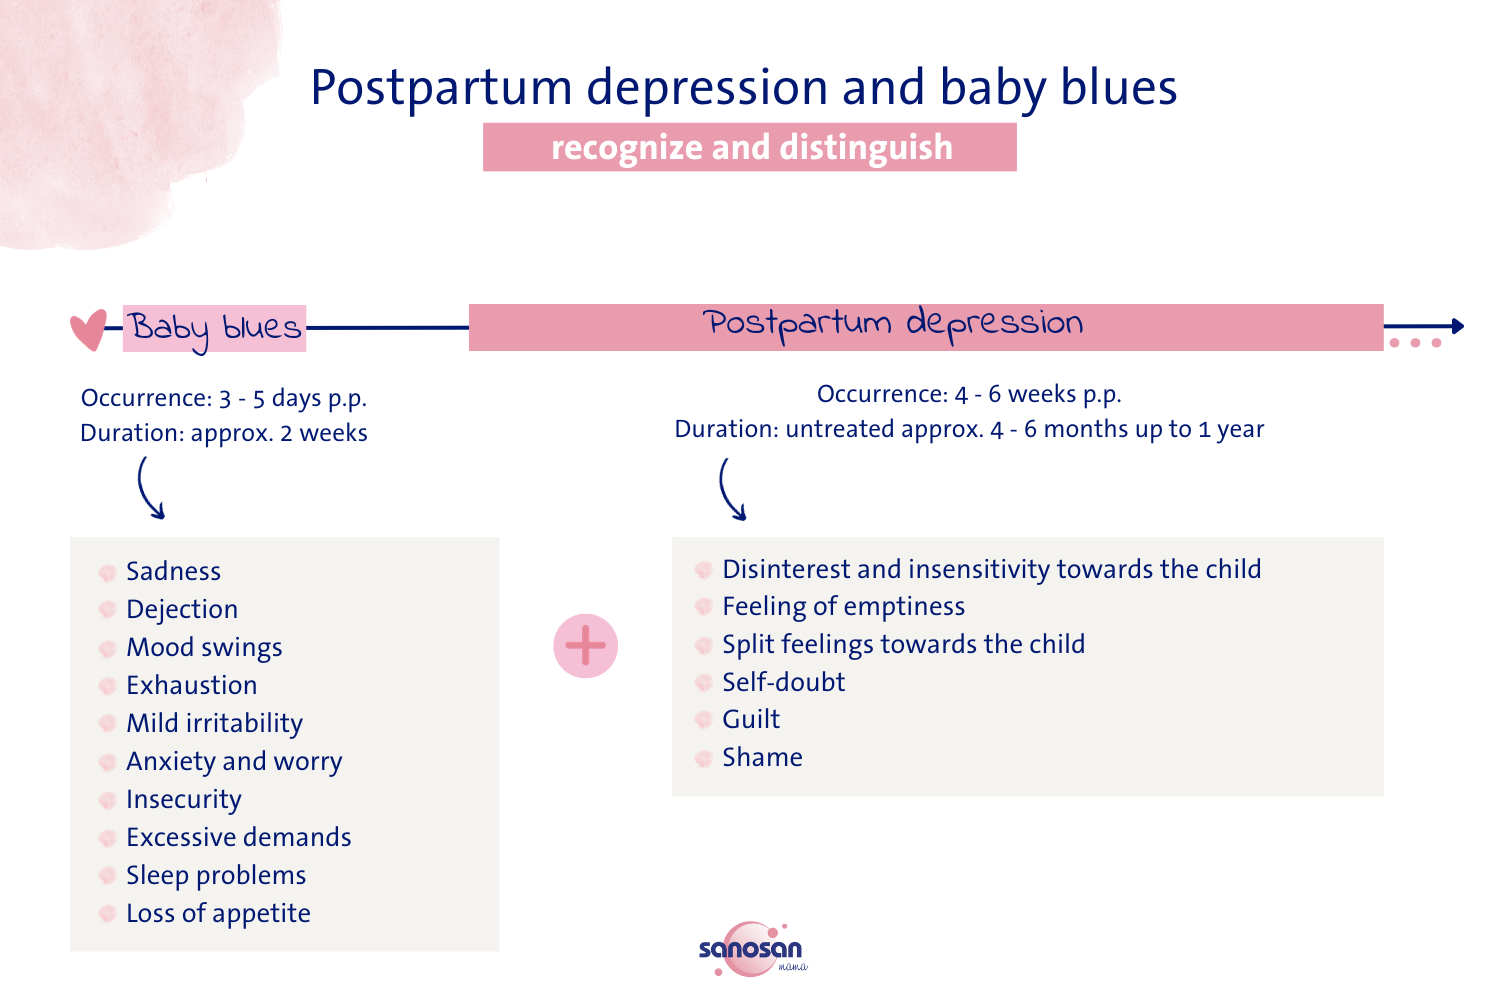 infografic on the differences between babyblues and postpartum depression